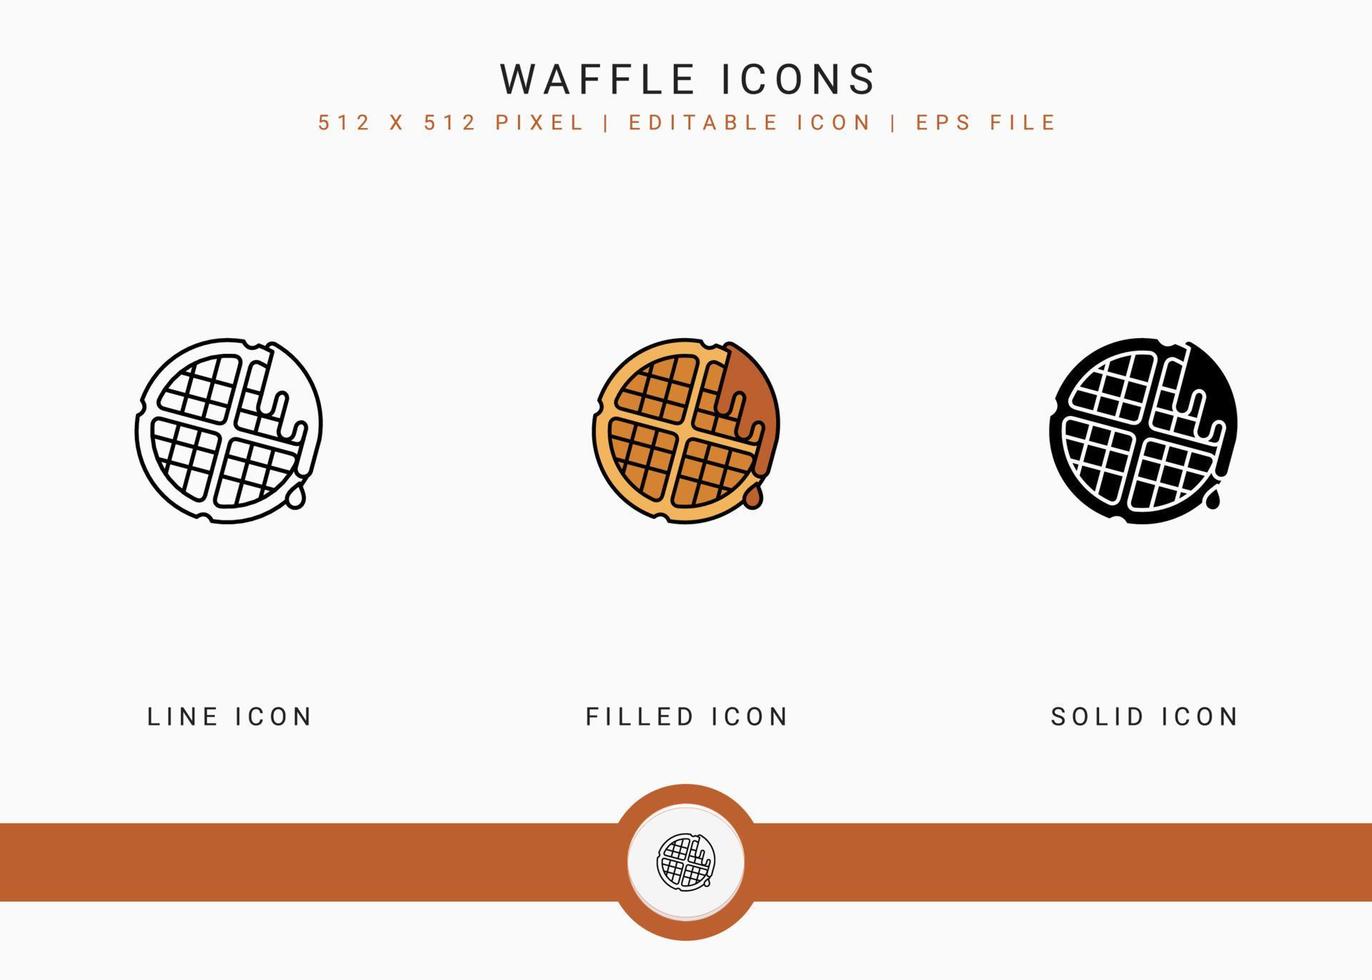 Waffle icons set vector illustration with solid icon line style. Cookie bake cake concept. Editable stroke icon on isolated background for web design, user interface, and mobile app